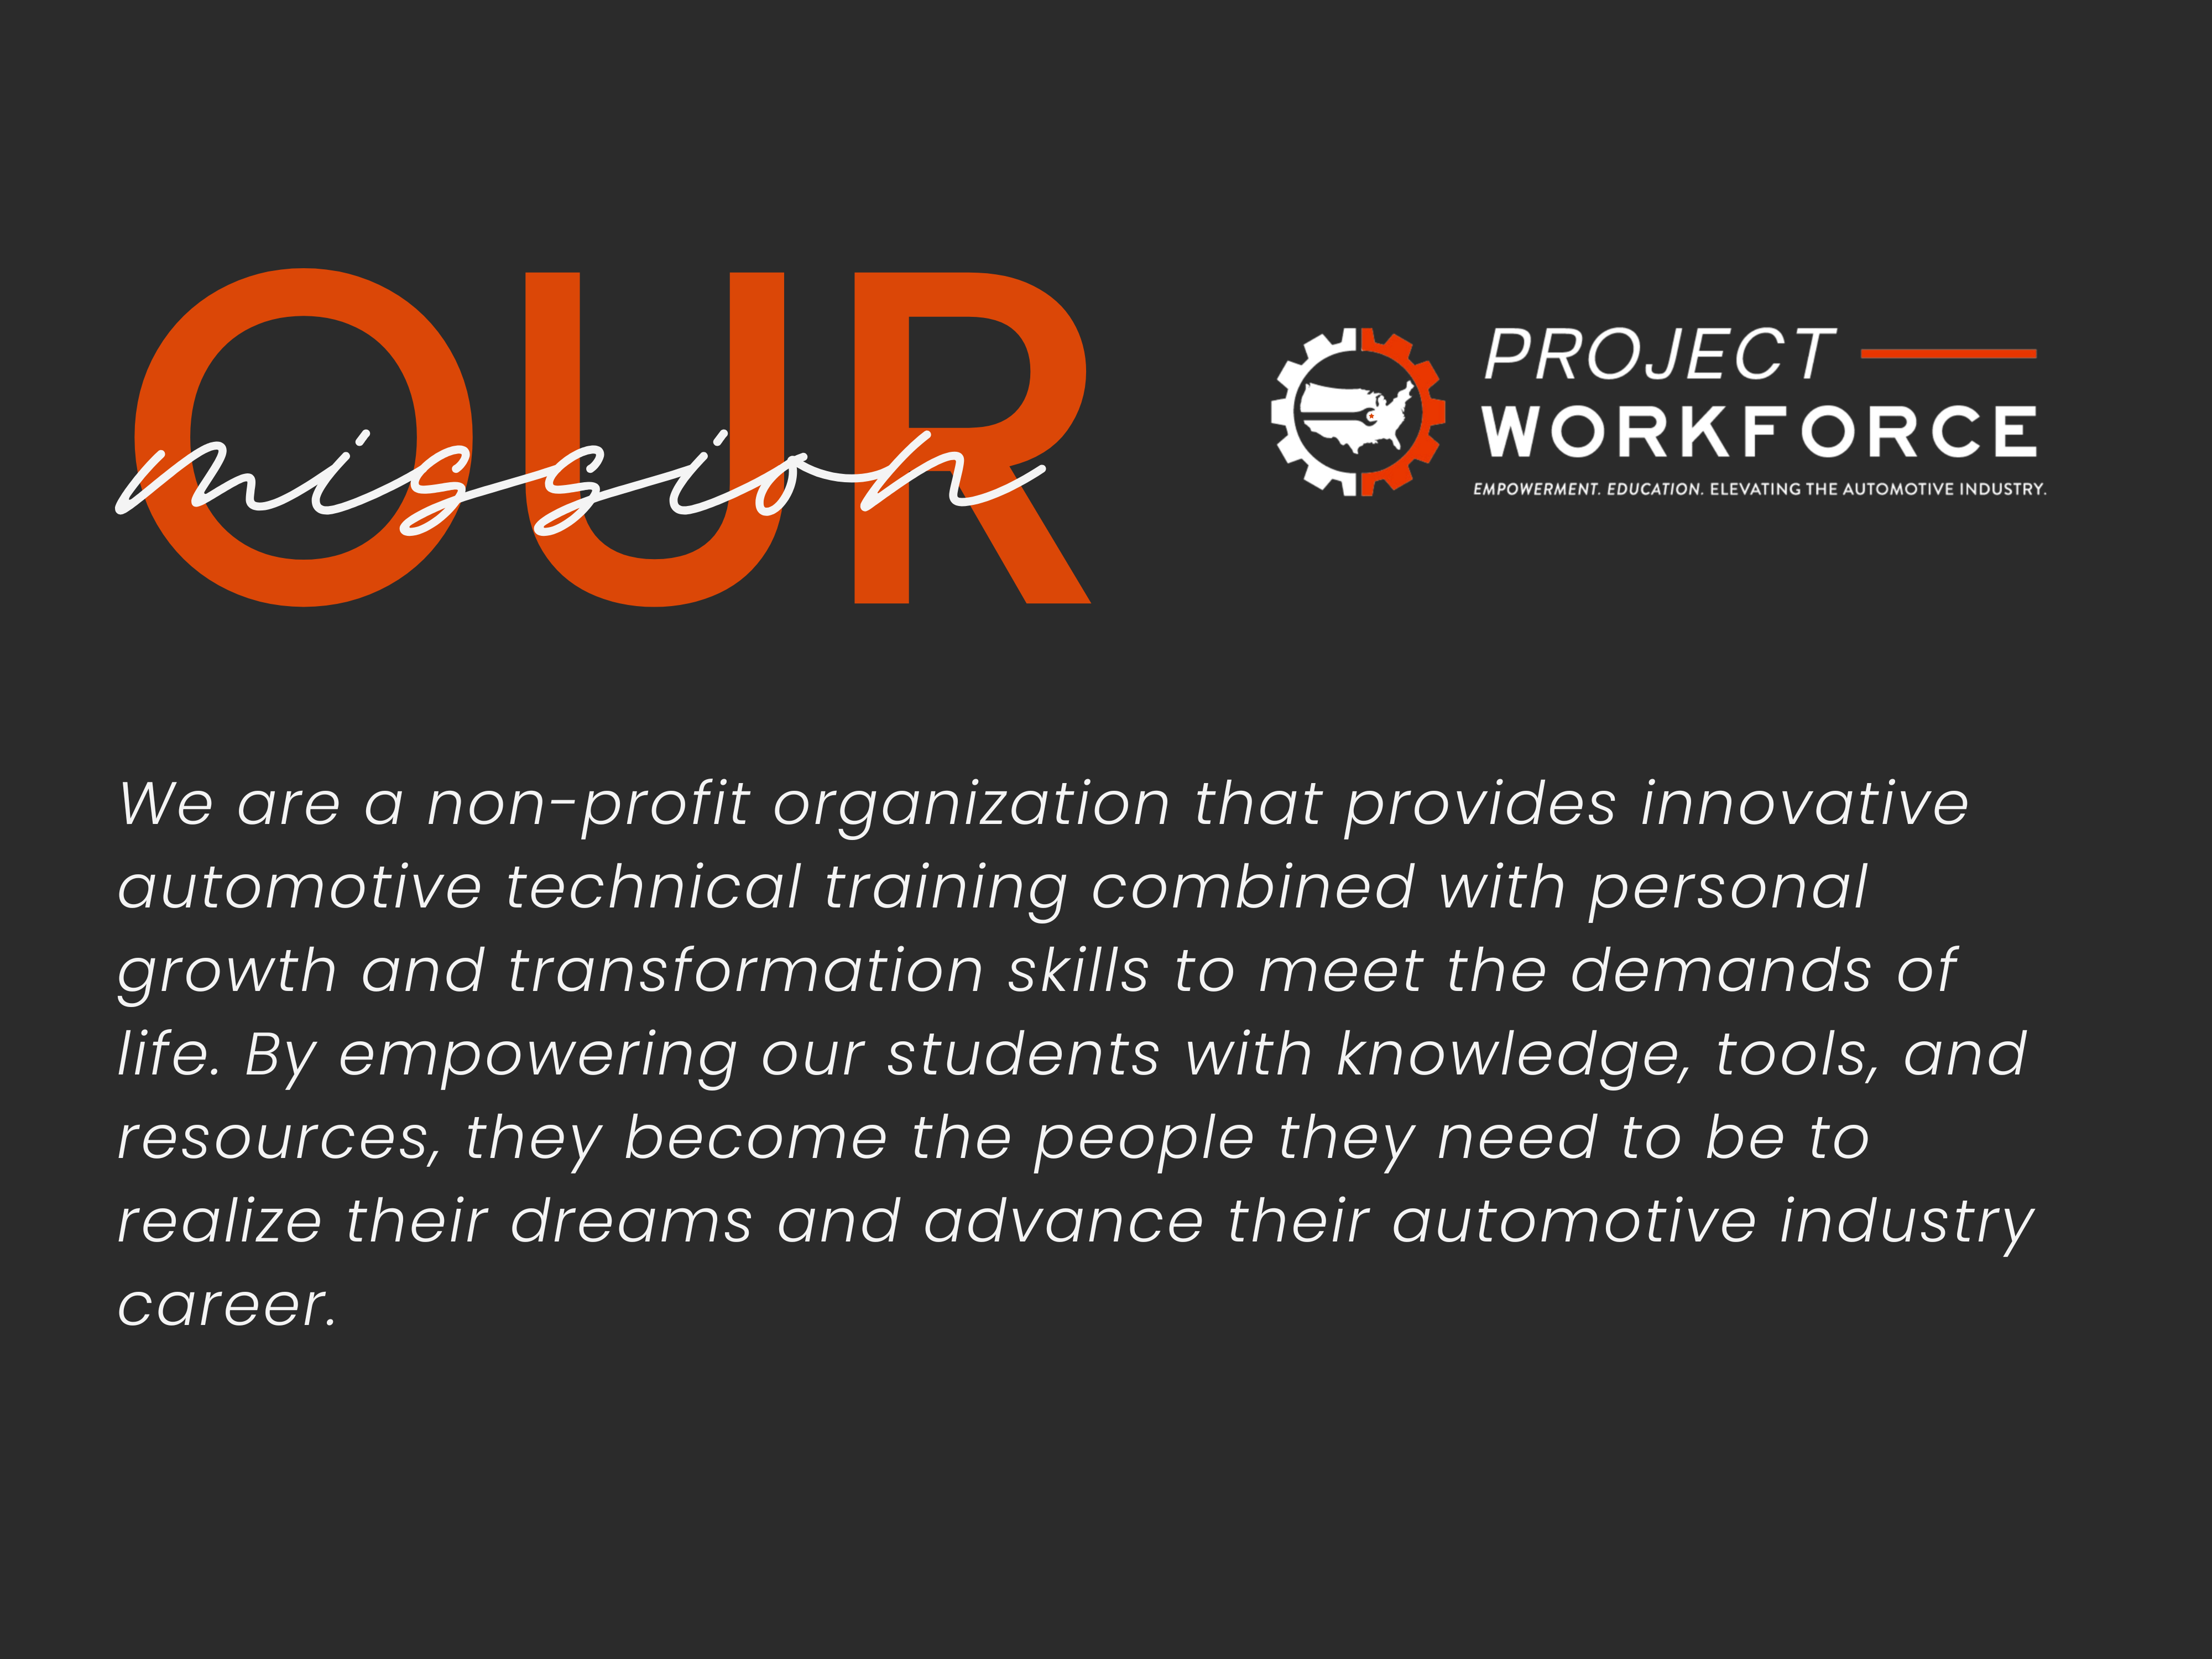 Project Workforce's mission